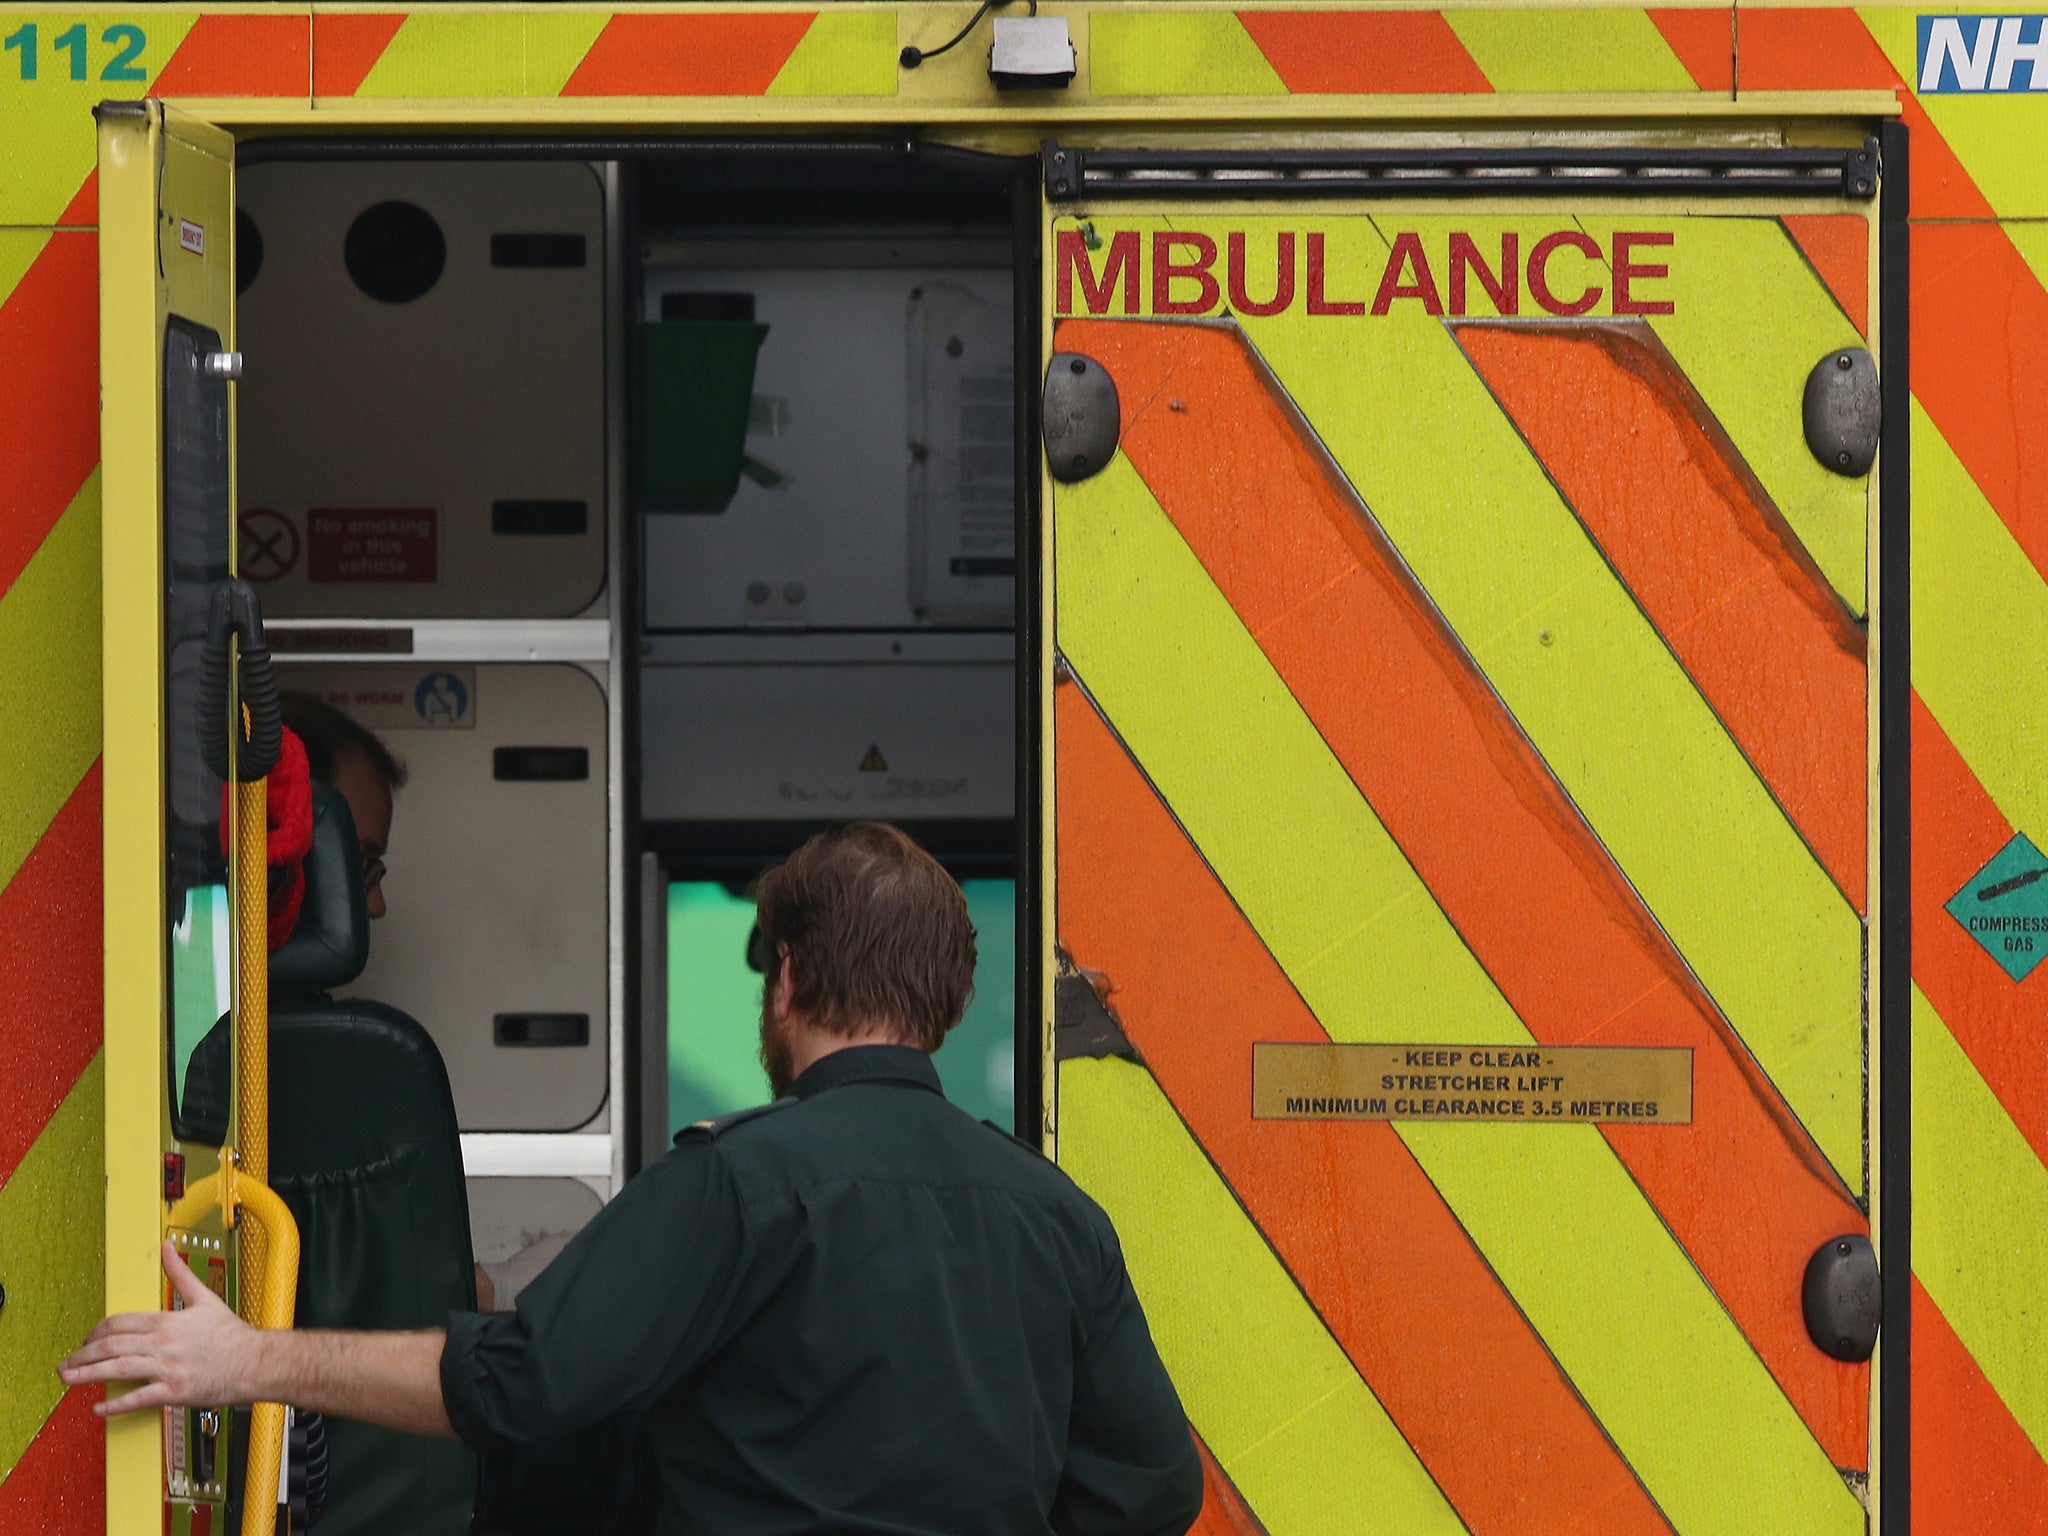 Paramedics can face a high degree of exposure to disease and infections